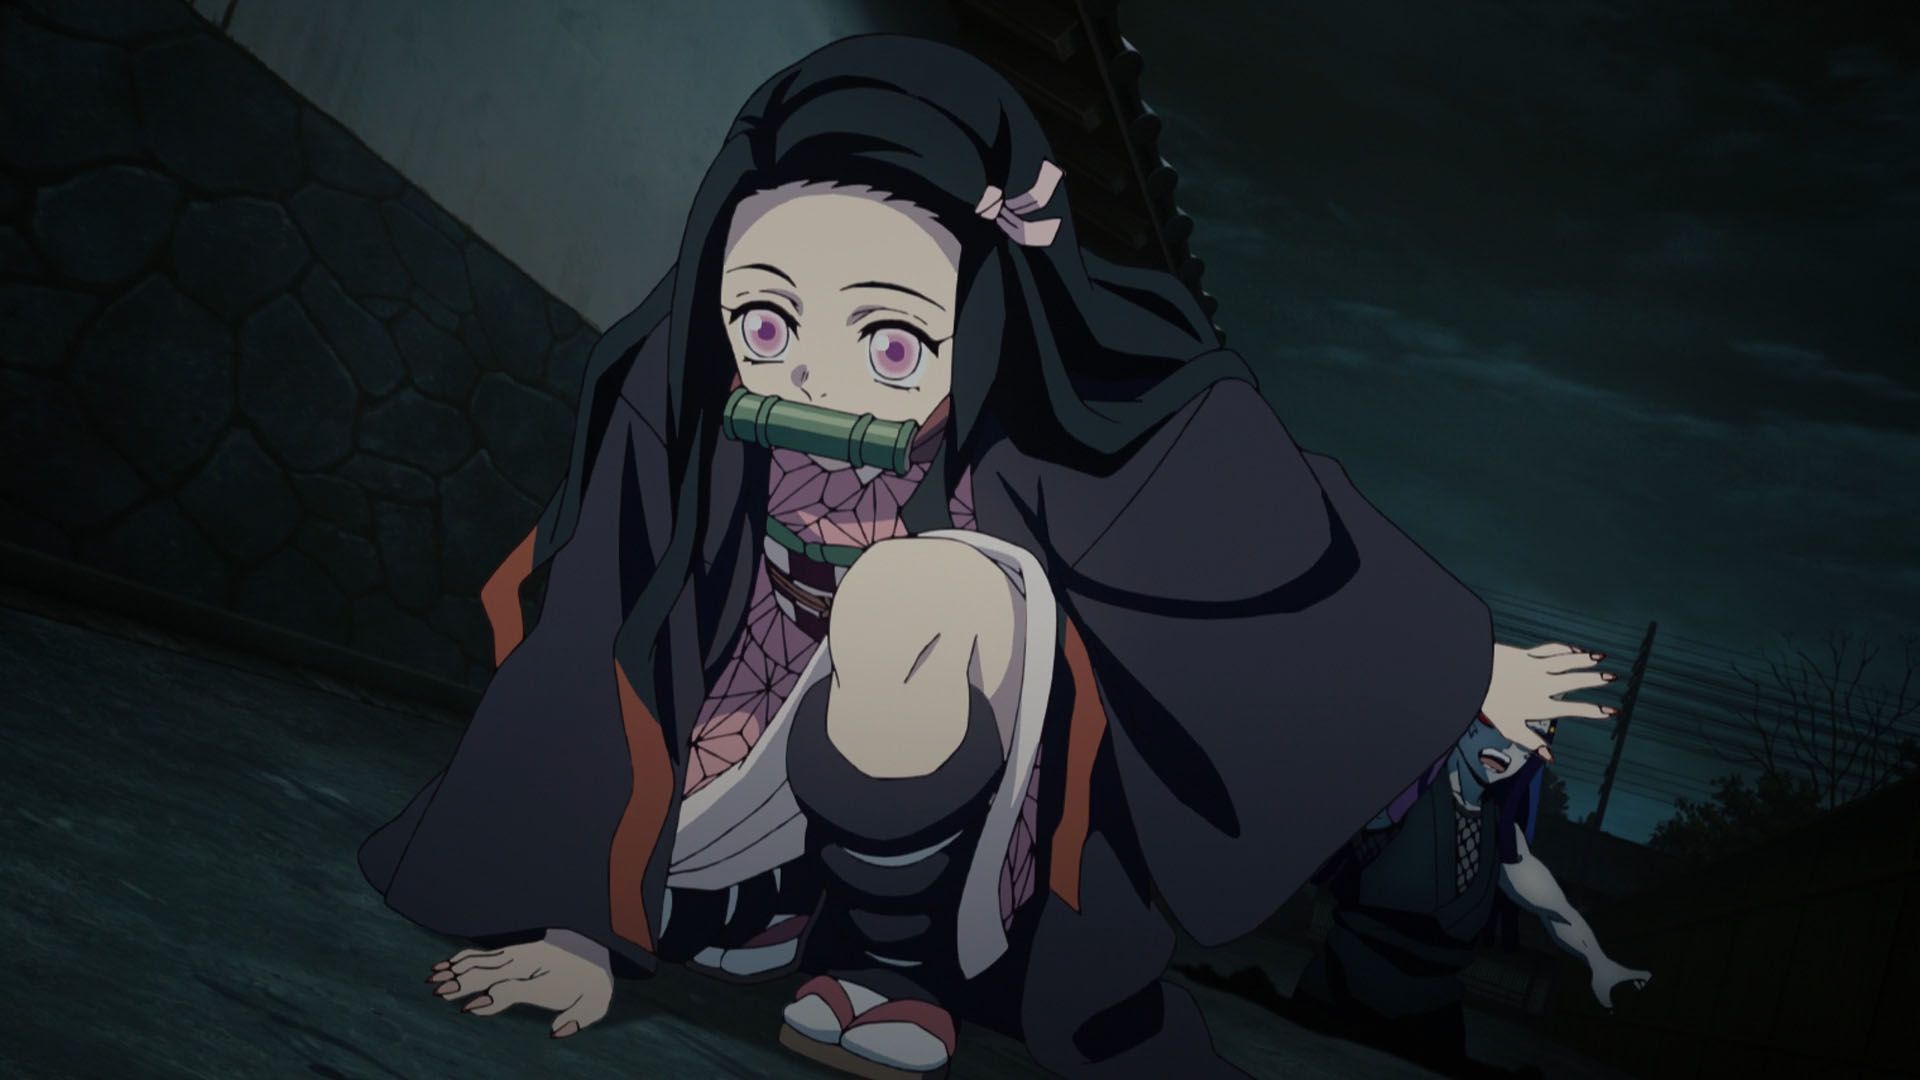 The 25 Best Anime Girls With Black Hair